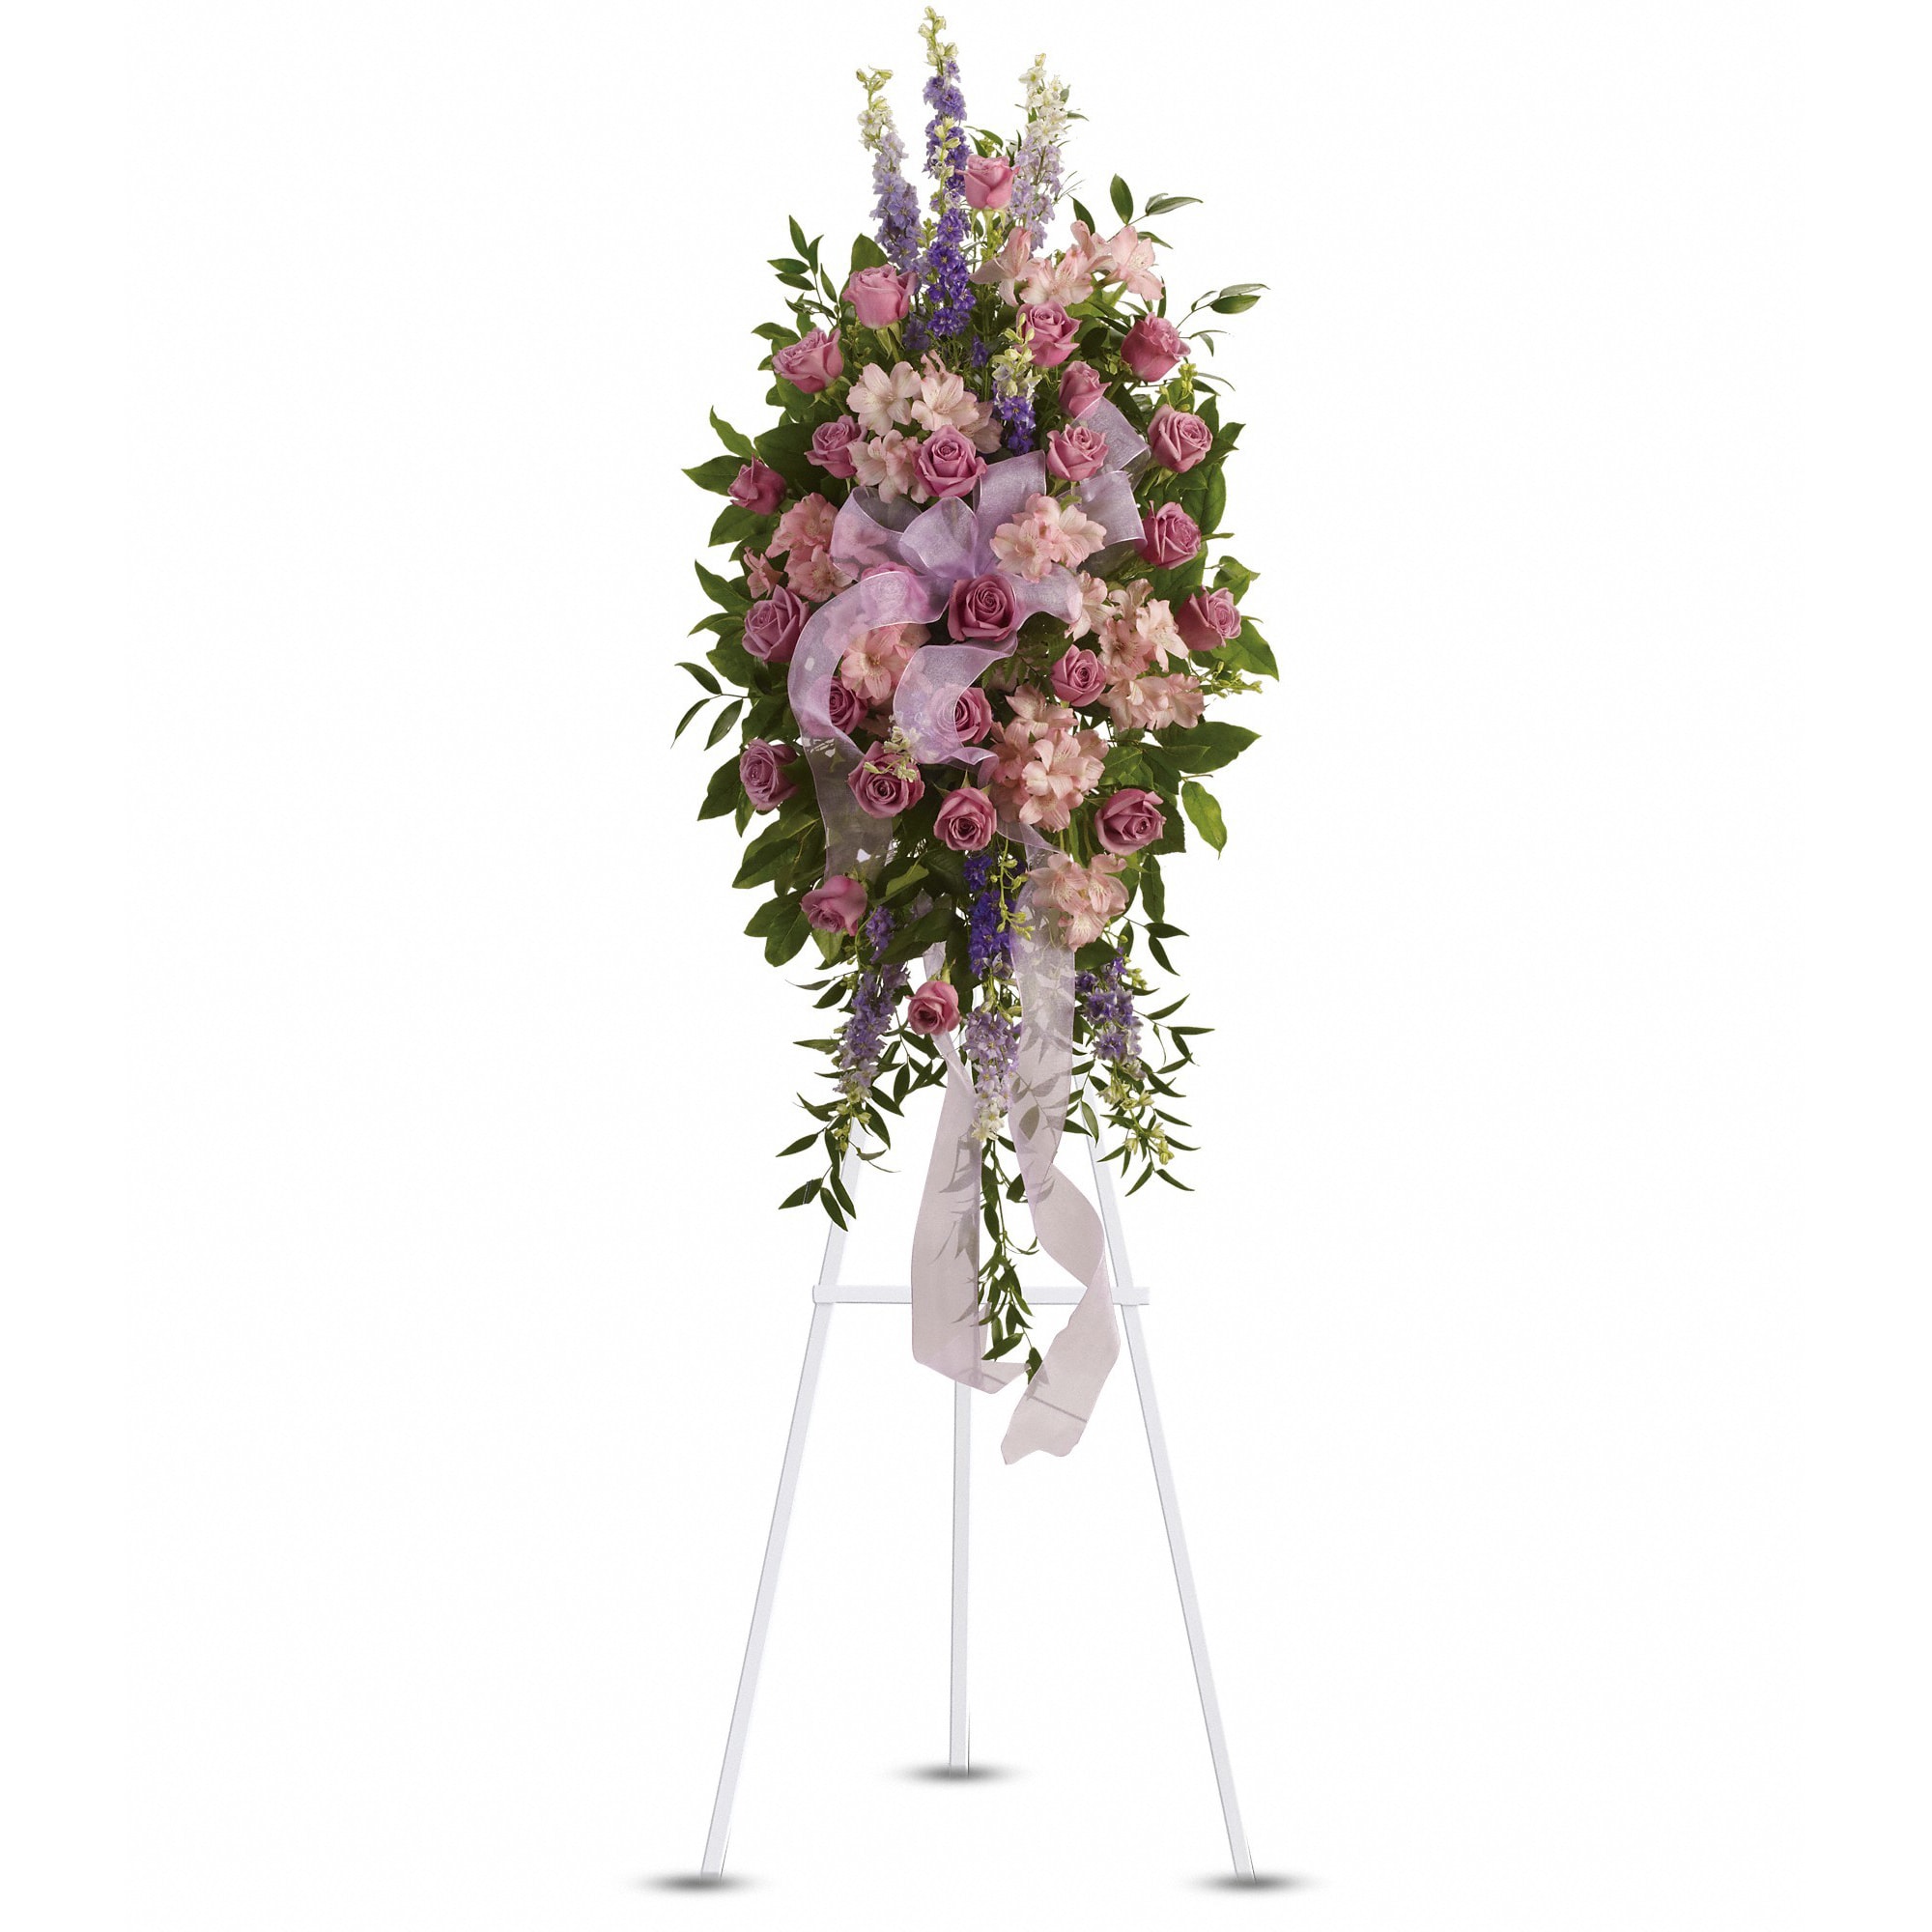 Finest Farewell Spray by Teleflora - Utterly feminine, this spray is an extraordinarily beautiful way to bid farewell to someone who will remain forever in your heart. A bevy of lovely lavender flowers will soothe souls and deliver strength and hope to those in mourning.  